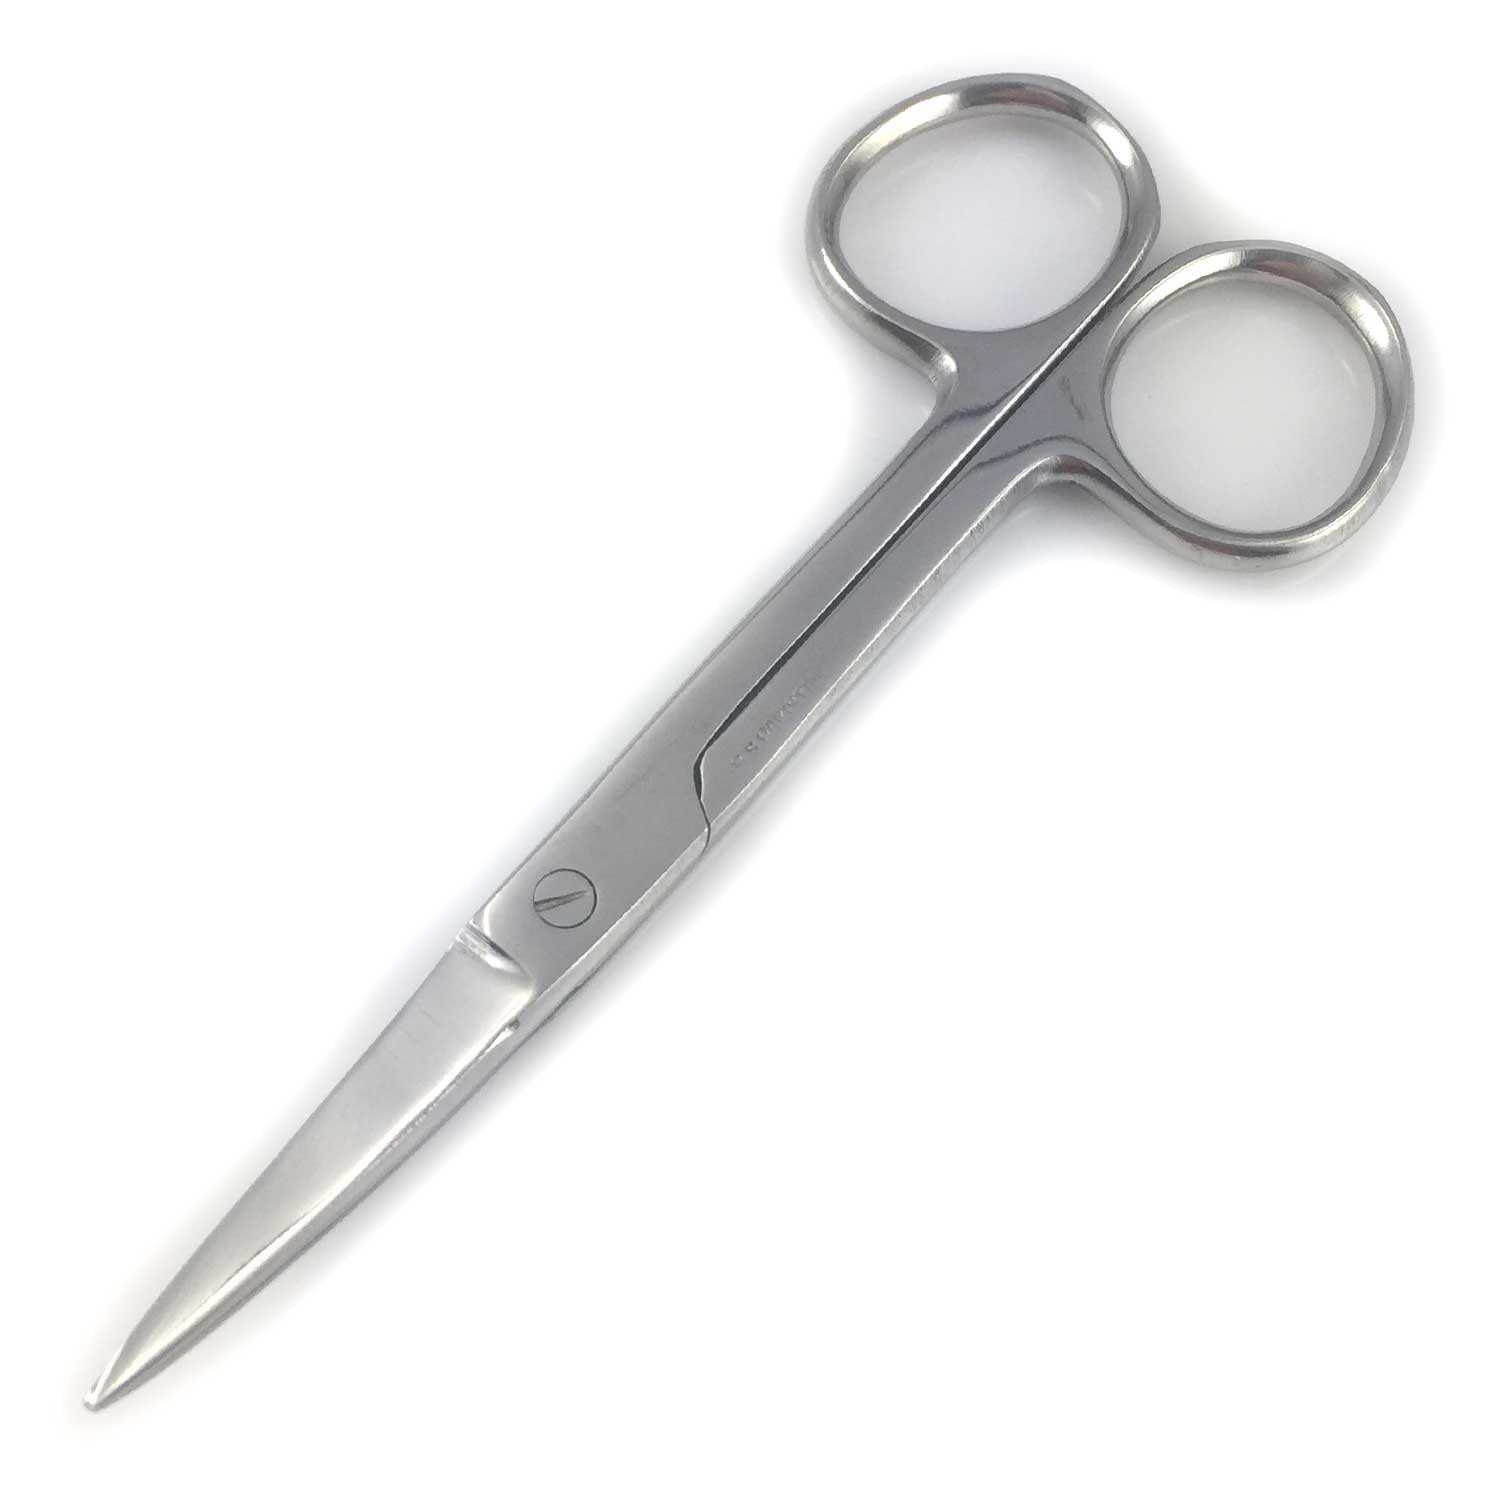 Scissors - 3.5 Curved Fine Point Surgical Quality Stainless Steel, Skincare for Athletes All Natural Handmade